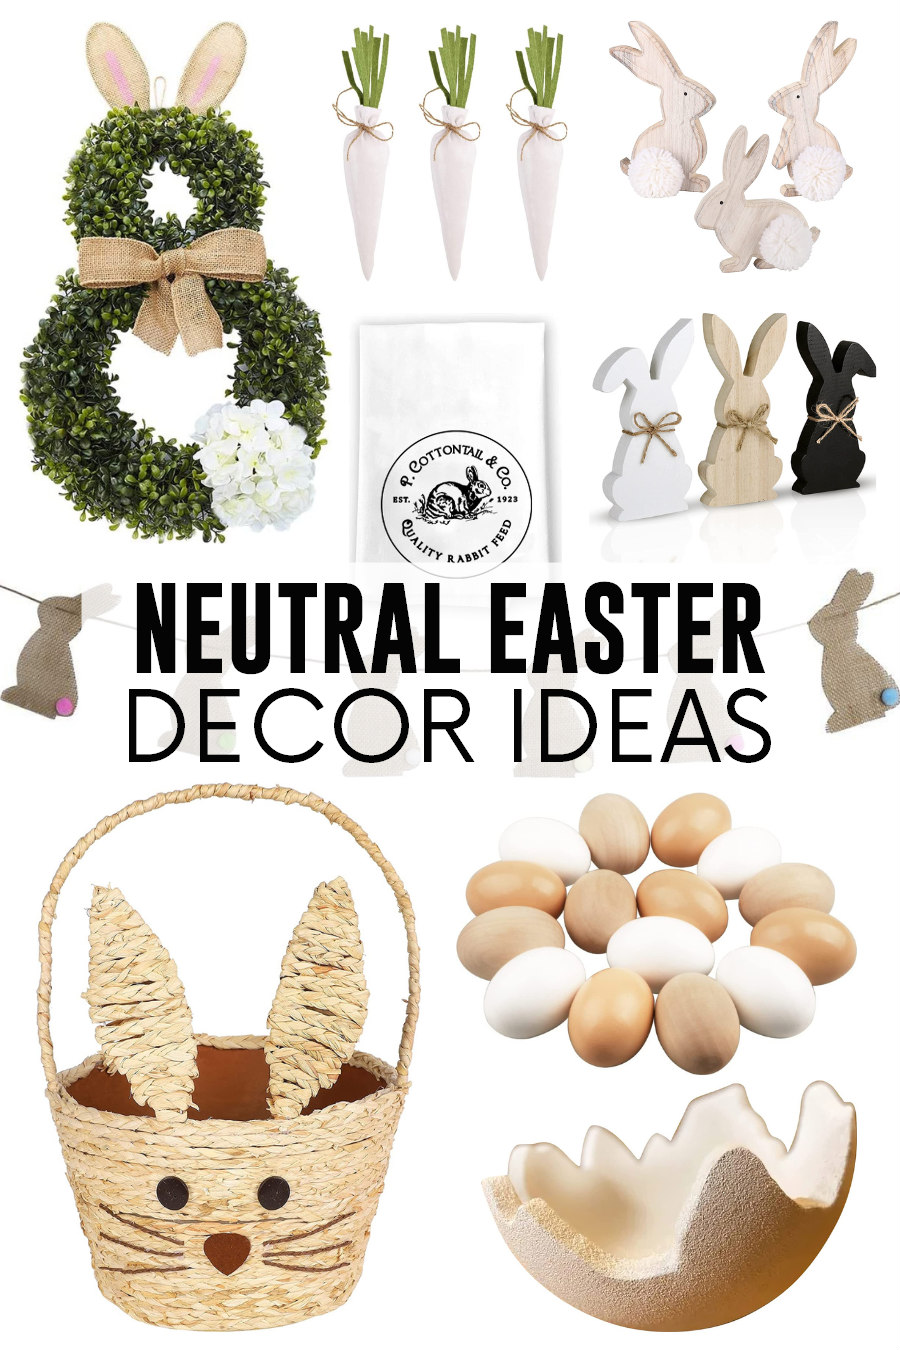 Neutral Easter decor ideas for the home including wreaths, bunnies, eggs, and baskets.